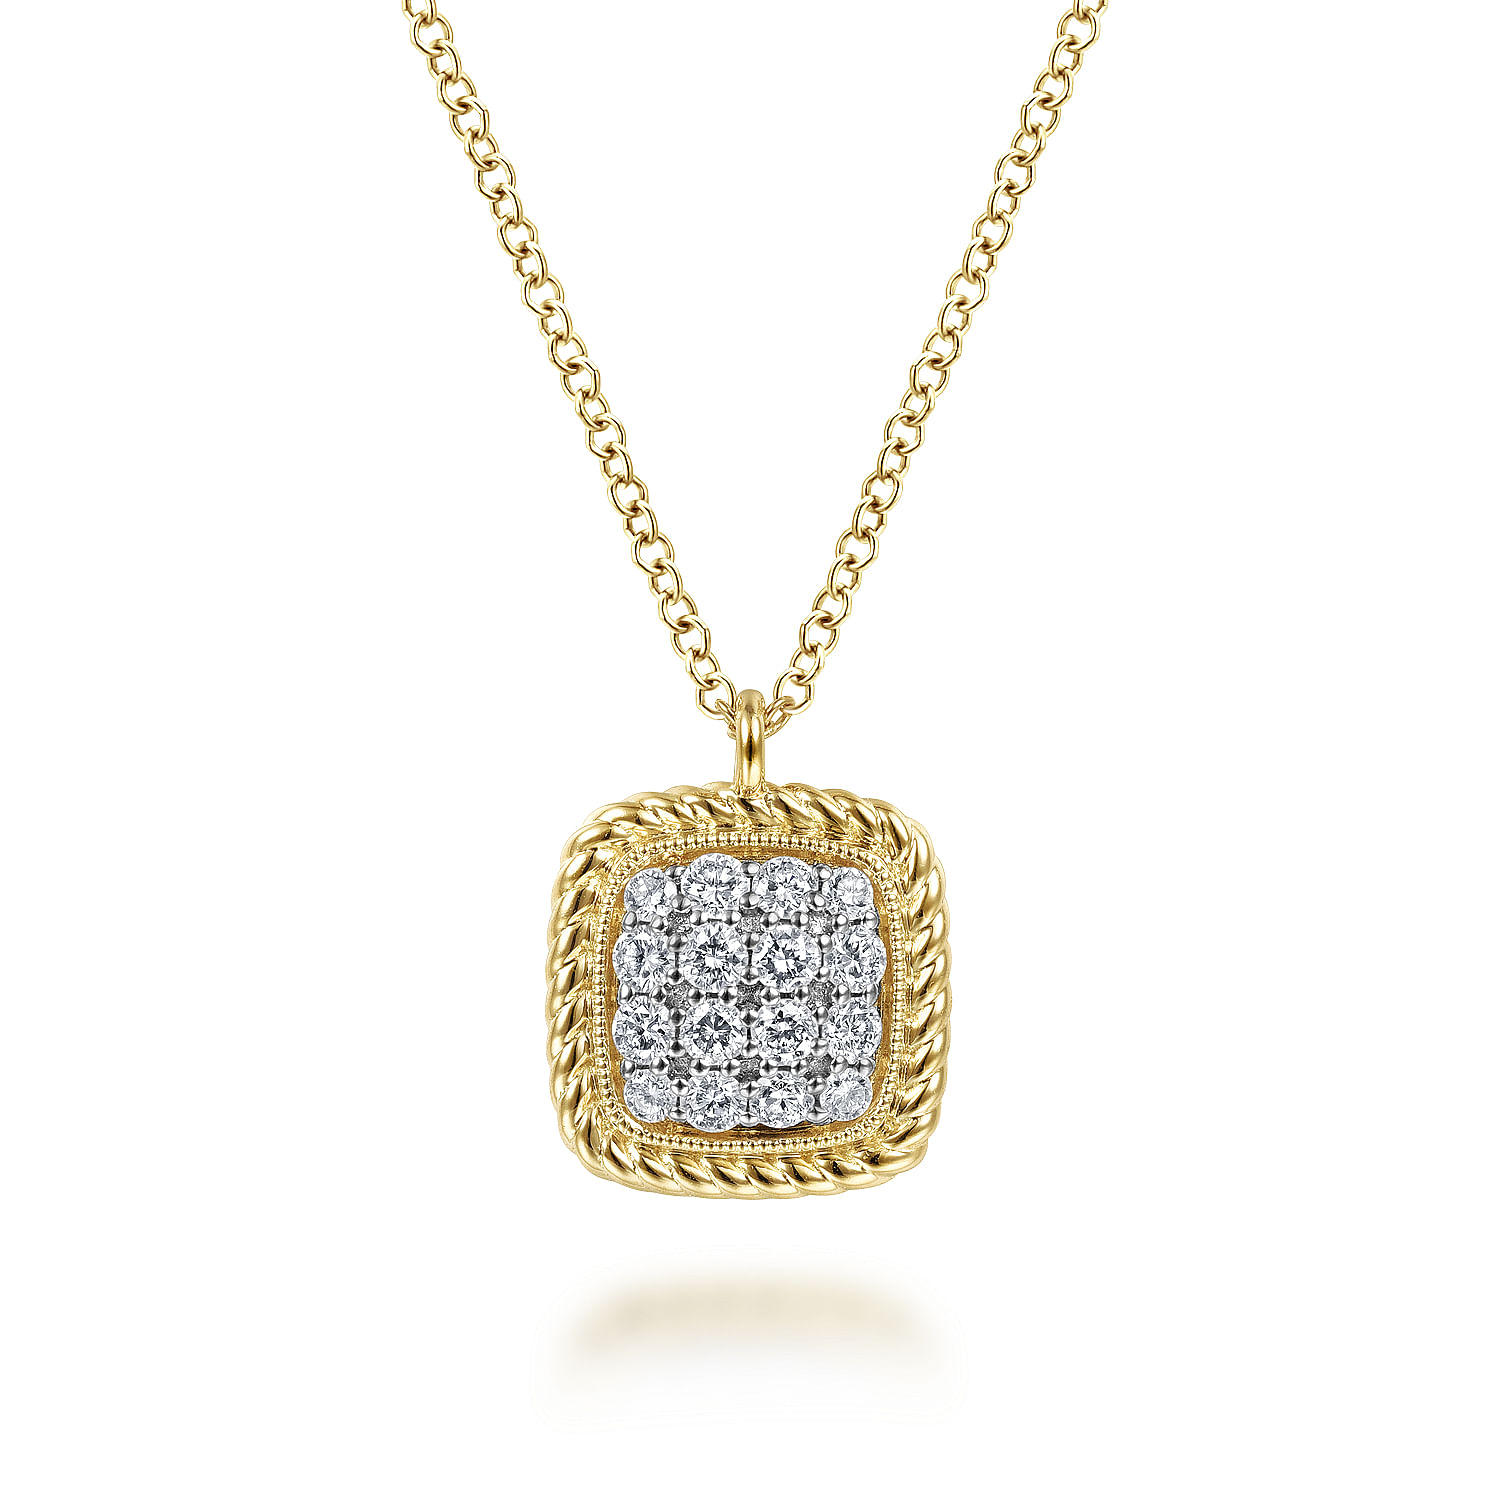 Square 14K Yellow Gold Pavé Diamond Pendant Necklace with Twisted Rope Frame